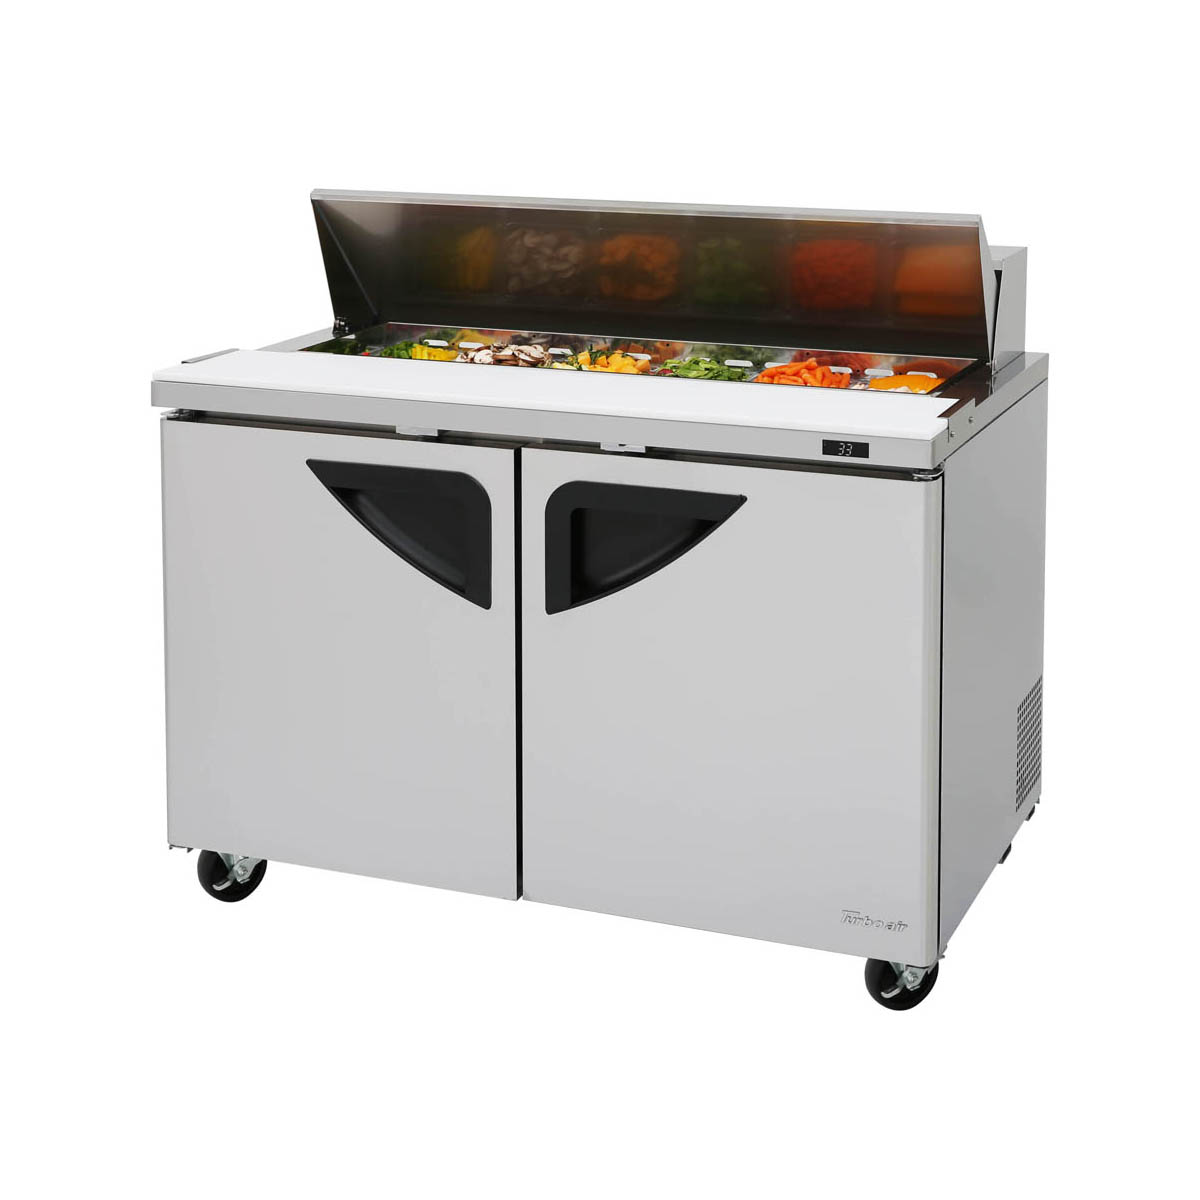 Turbo Air TST-48SD-N 48″ Two Section Sandwich / Salad Prep Table, 12.0 cu. ft.